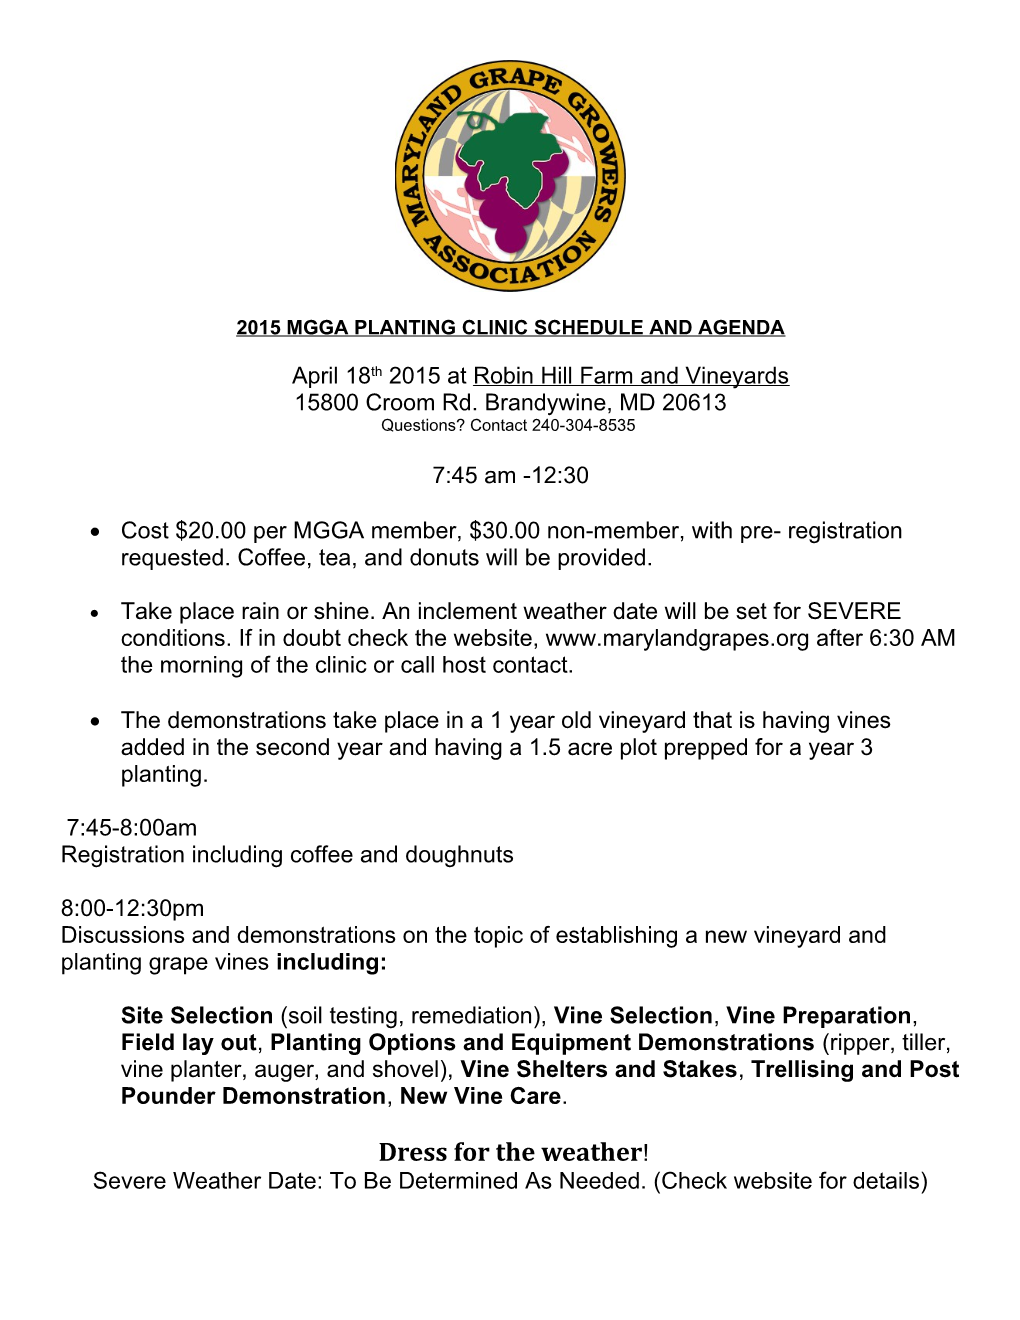 2015 Mgga Planting Clinic Schedule and Agenda